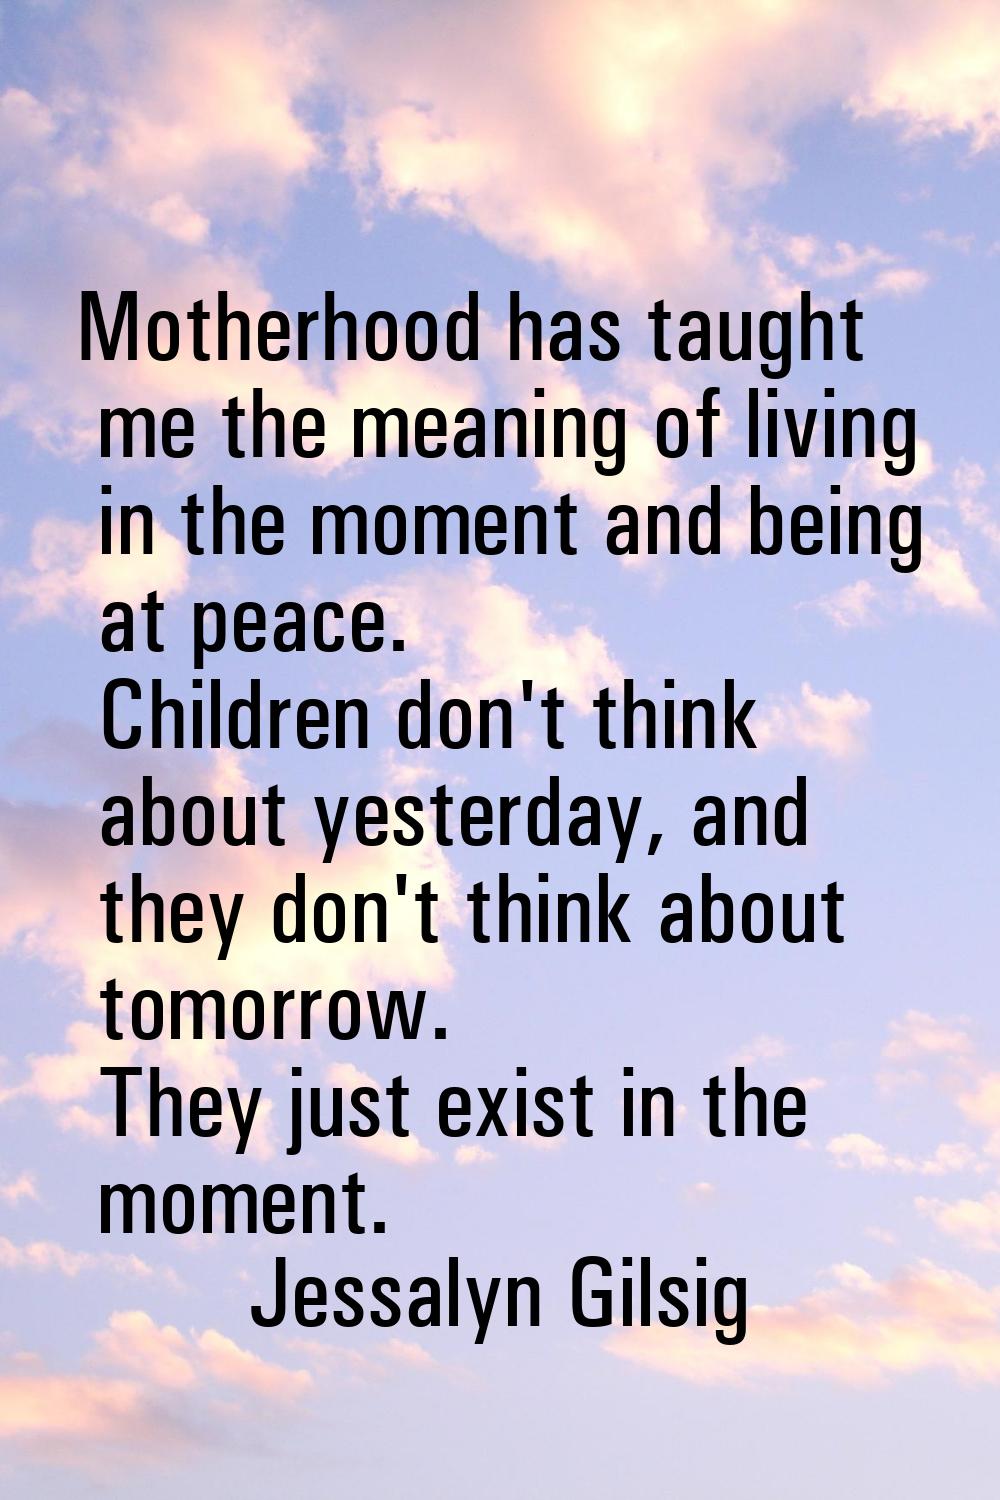 Motherhood has taught me the meaning of living in the moment and being at peace. Children don't thi